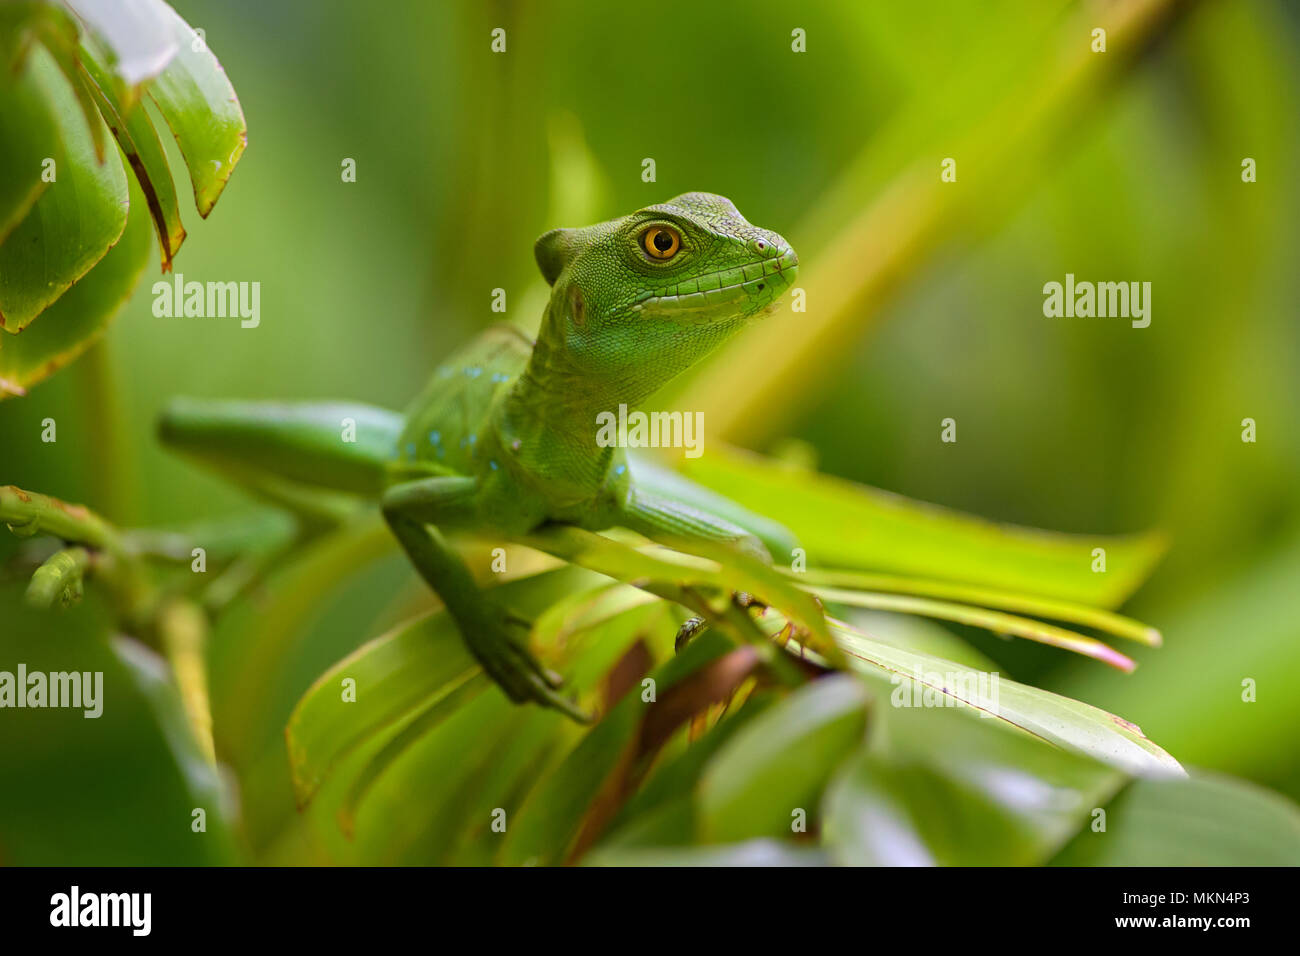 Green Basilisk - Basiliscus plumifrons, green lizard from Central America forests, Costa Rica. Stock Photo